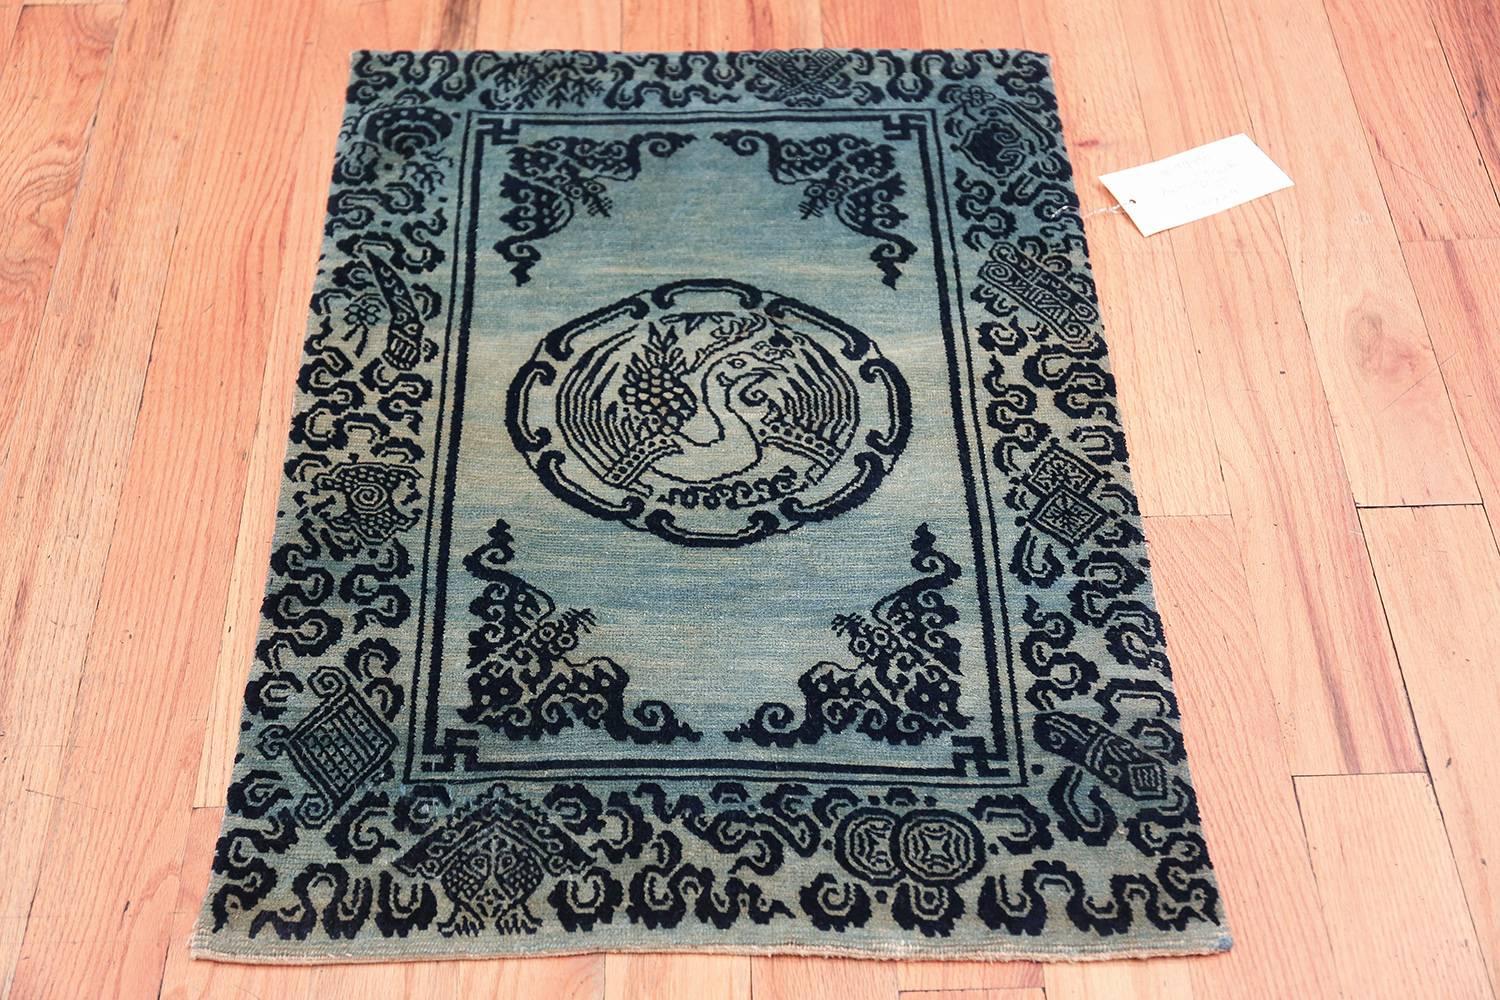 Beautiful antique blue background Tibetan rug, country of origin / rug type: Tibet rug, date: circa 1900
Tibetan rugs – The country of Tibet is a fascinating and unique place in the world. It is a culture within a culture that has developed a very